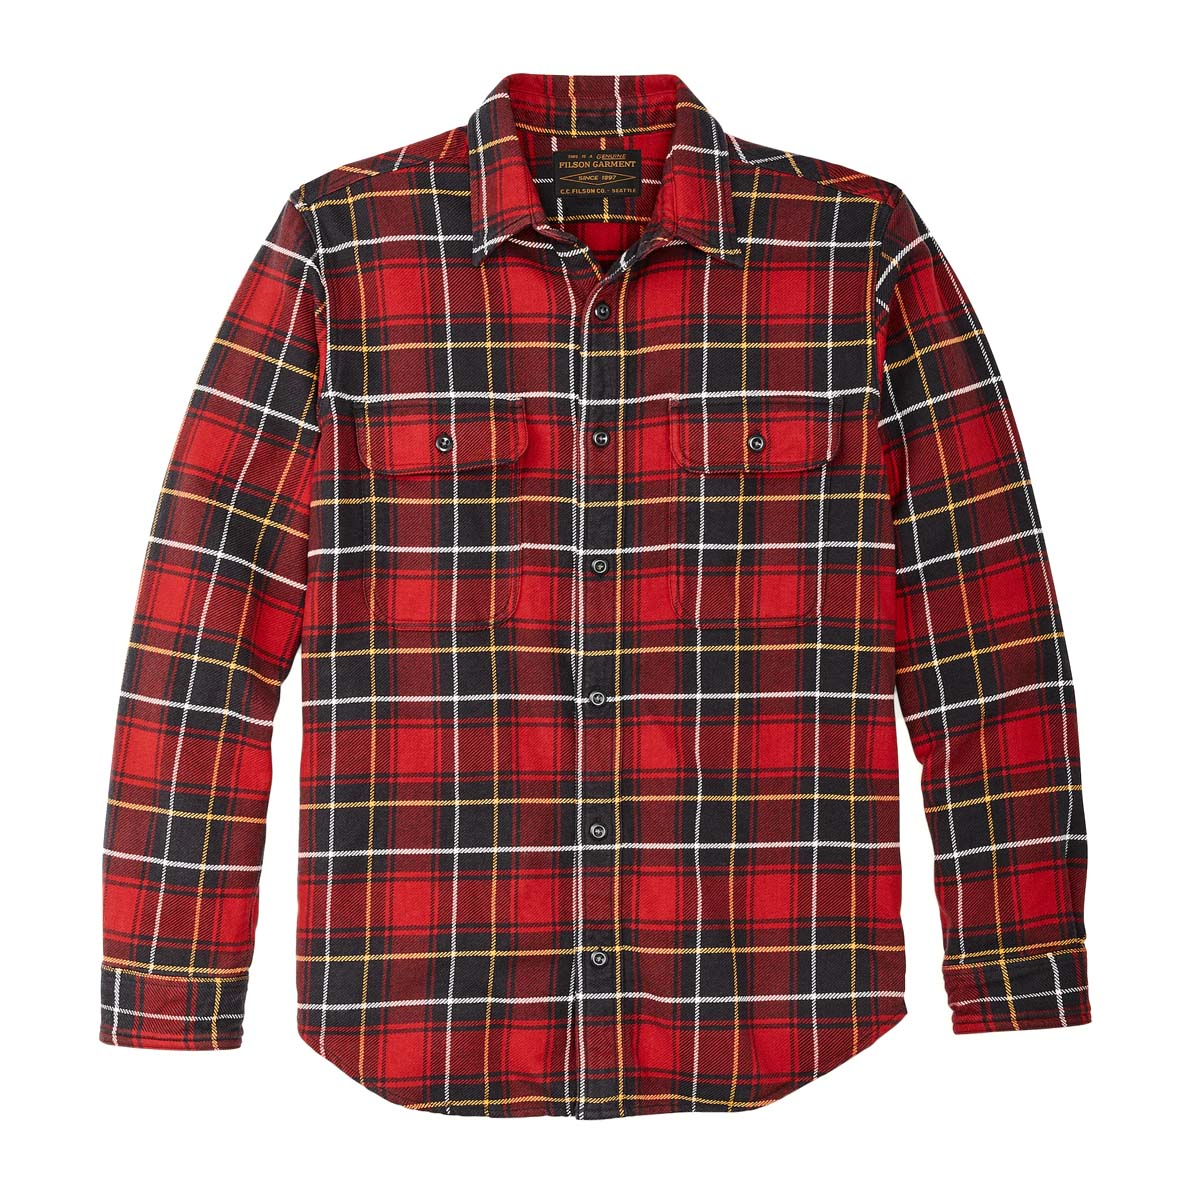 Filson Vintage Flannel Work Shirt Red Charcoal Plaid